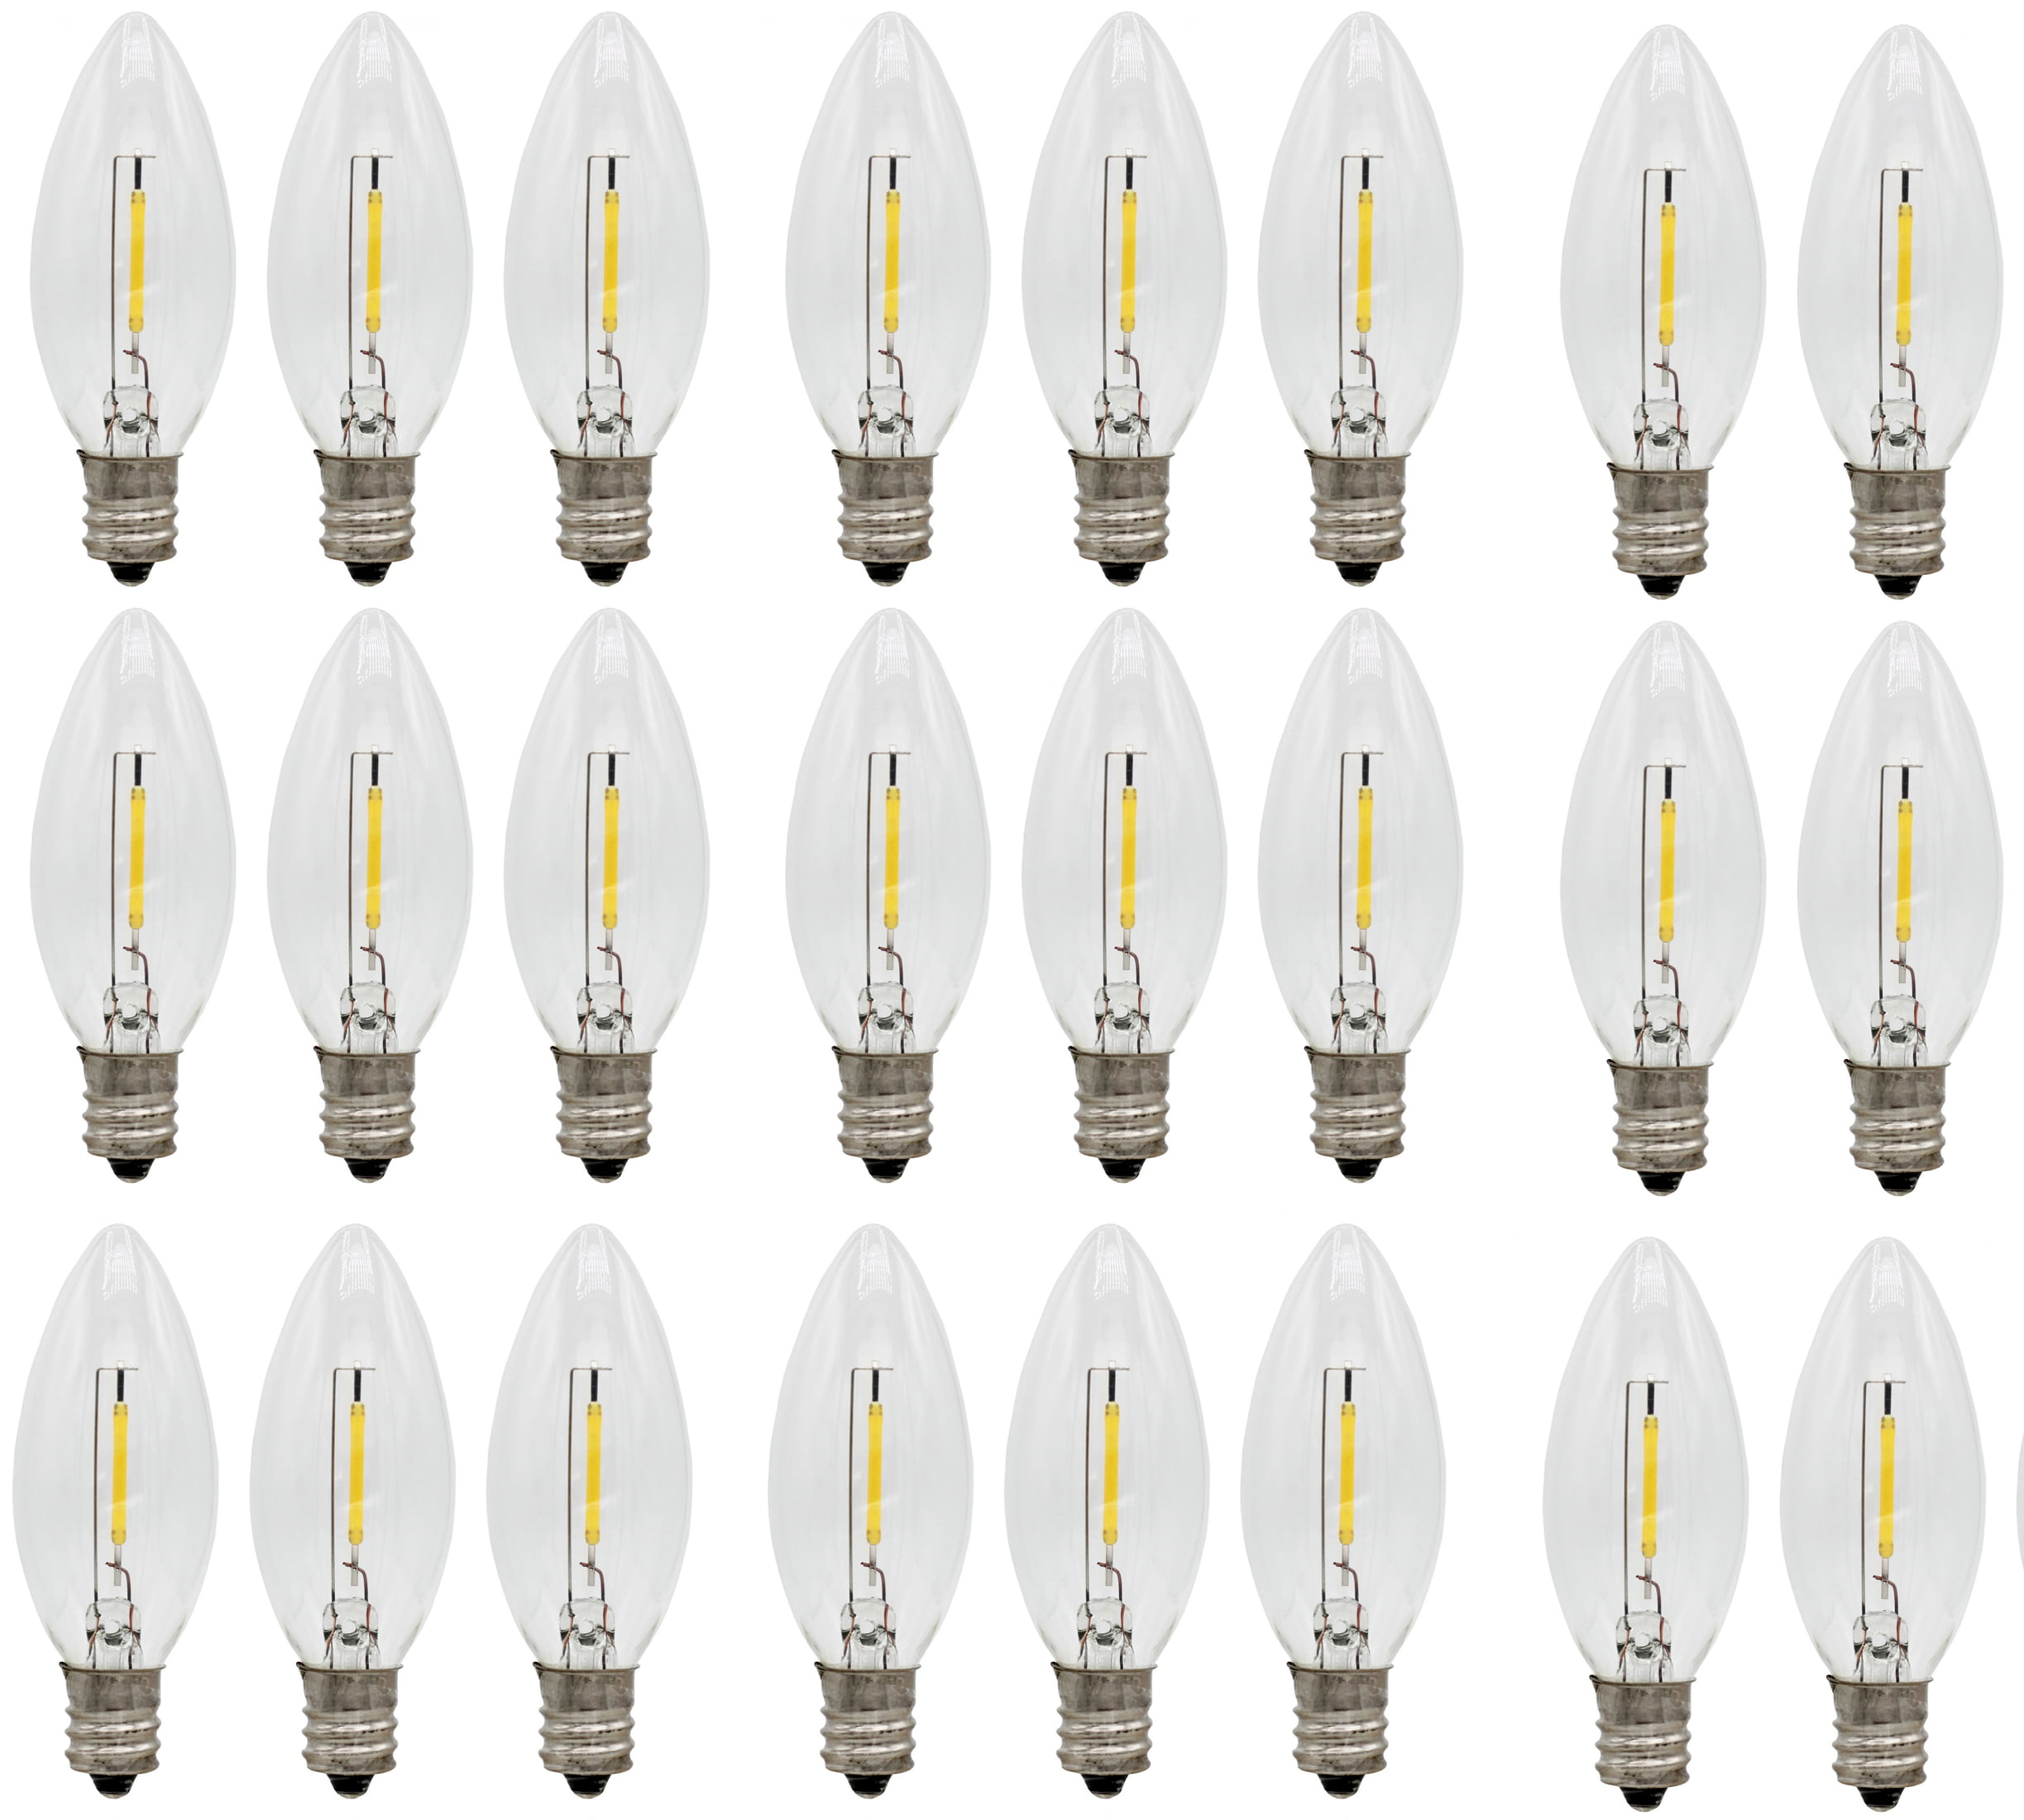 Replacement Light Bulbs for Electric Candle Lamps Window Candles 12 Pack 7W 